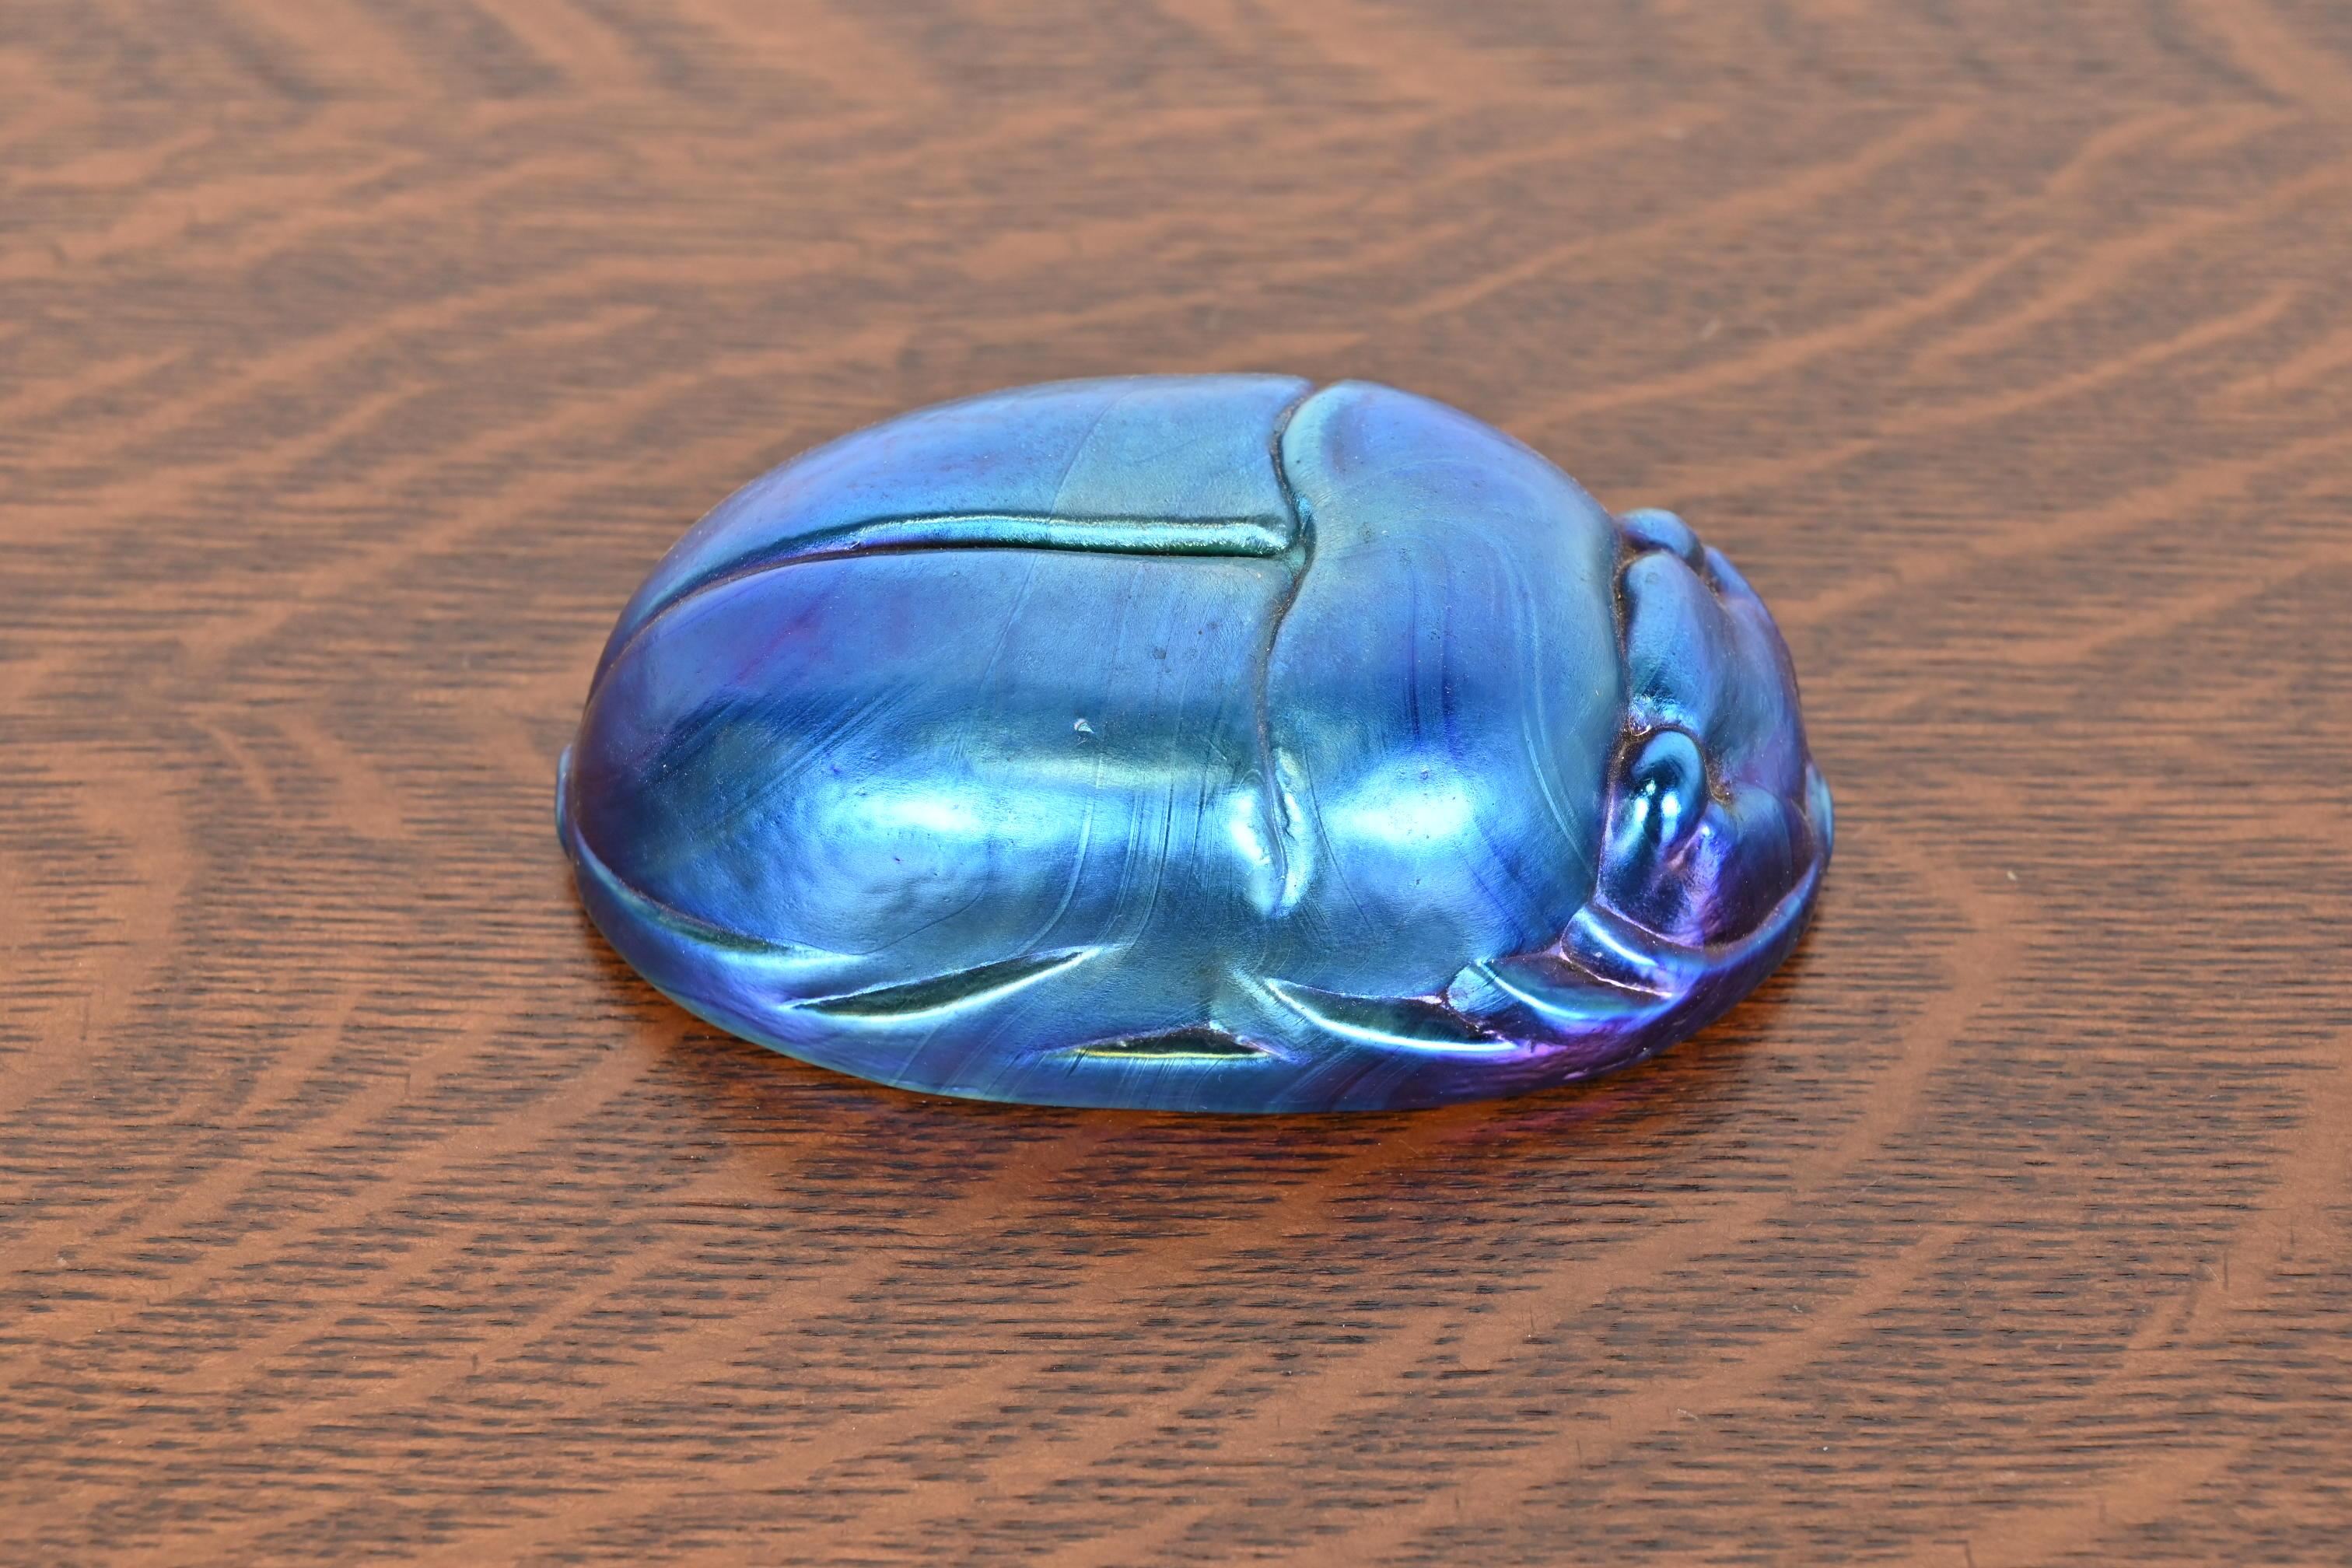 A gorgeous Arts & Crafts or Art Deco style iridescent favrile glass scarab paper weight

In the manner of Tiffany Studios

USA, 20th Century

Measures: 5